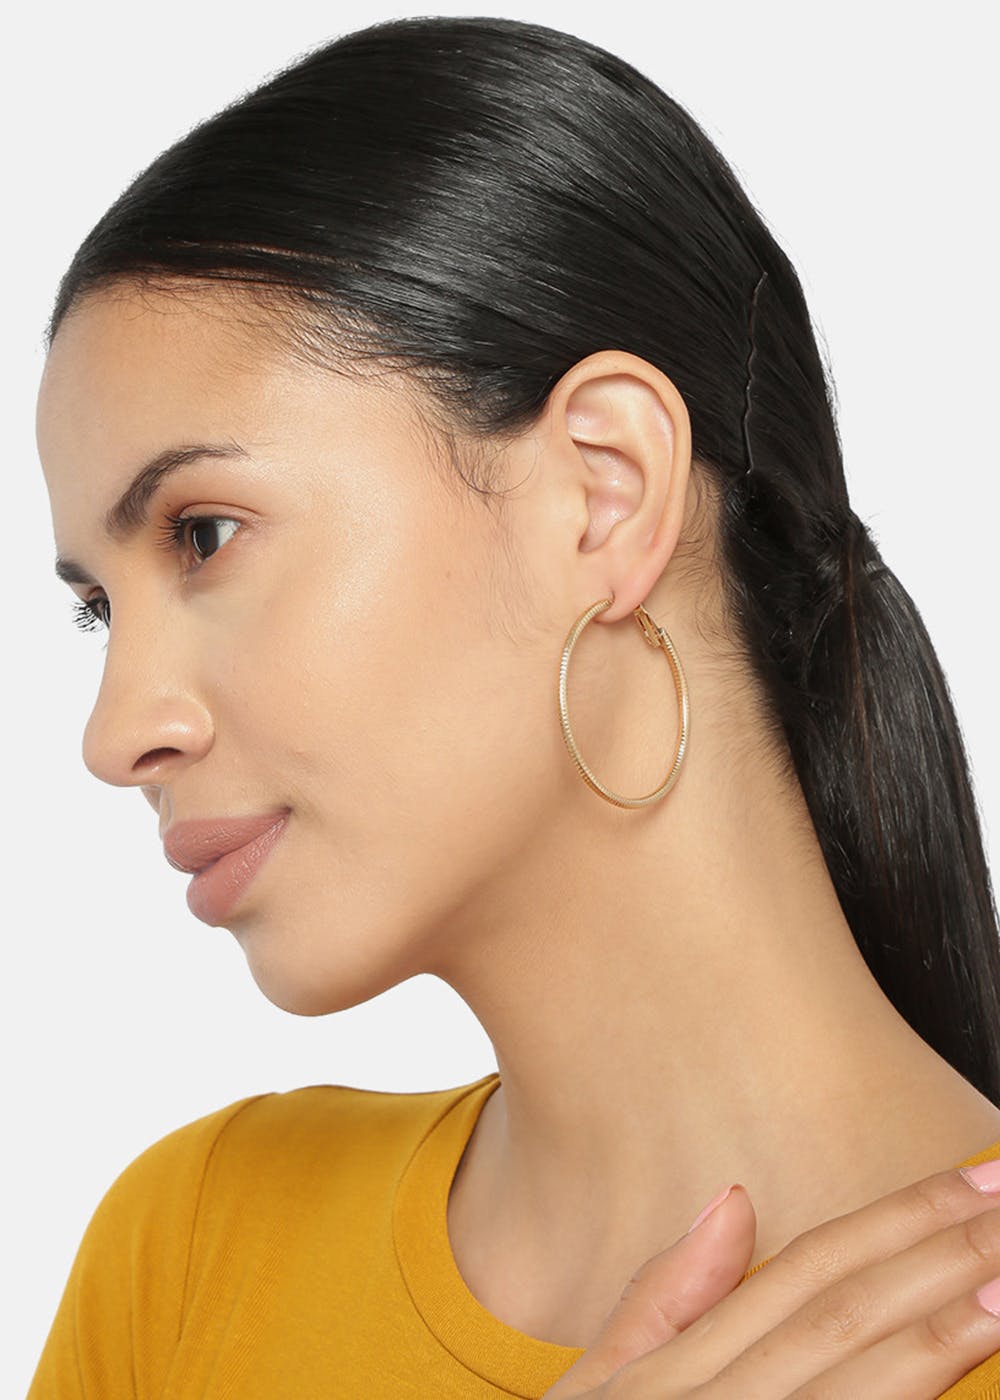 Valerie Madison 14k Gold Large Double Hoop Earrings | Valerie Madison's  Jewellery Is the Kind of Eye Candy We Could All Use Right About Now |  POPSUGAR Fashion UK Photo 11